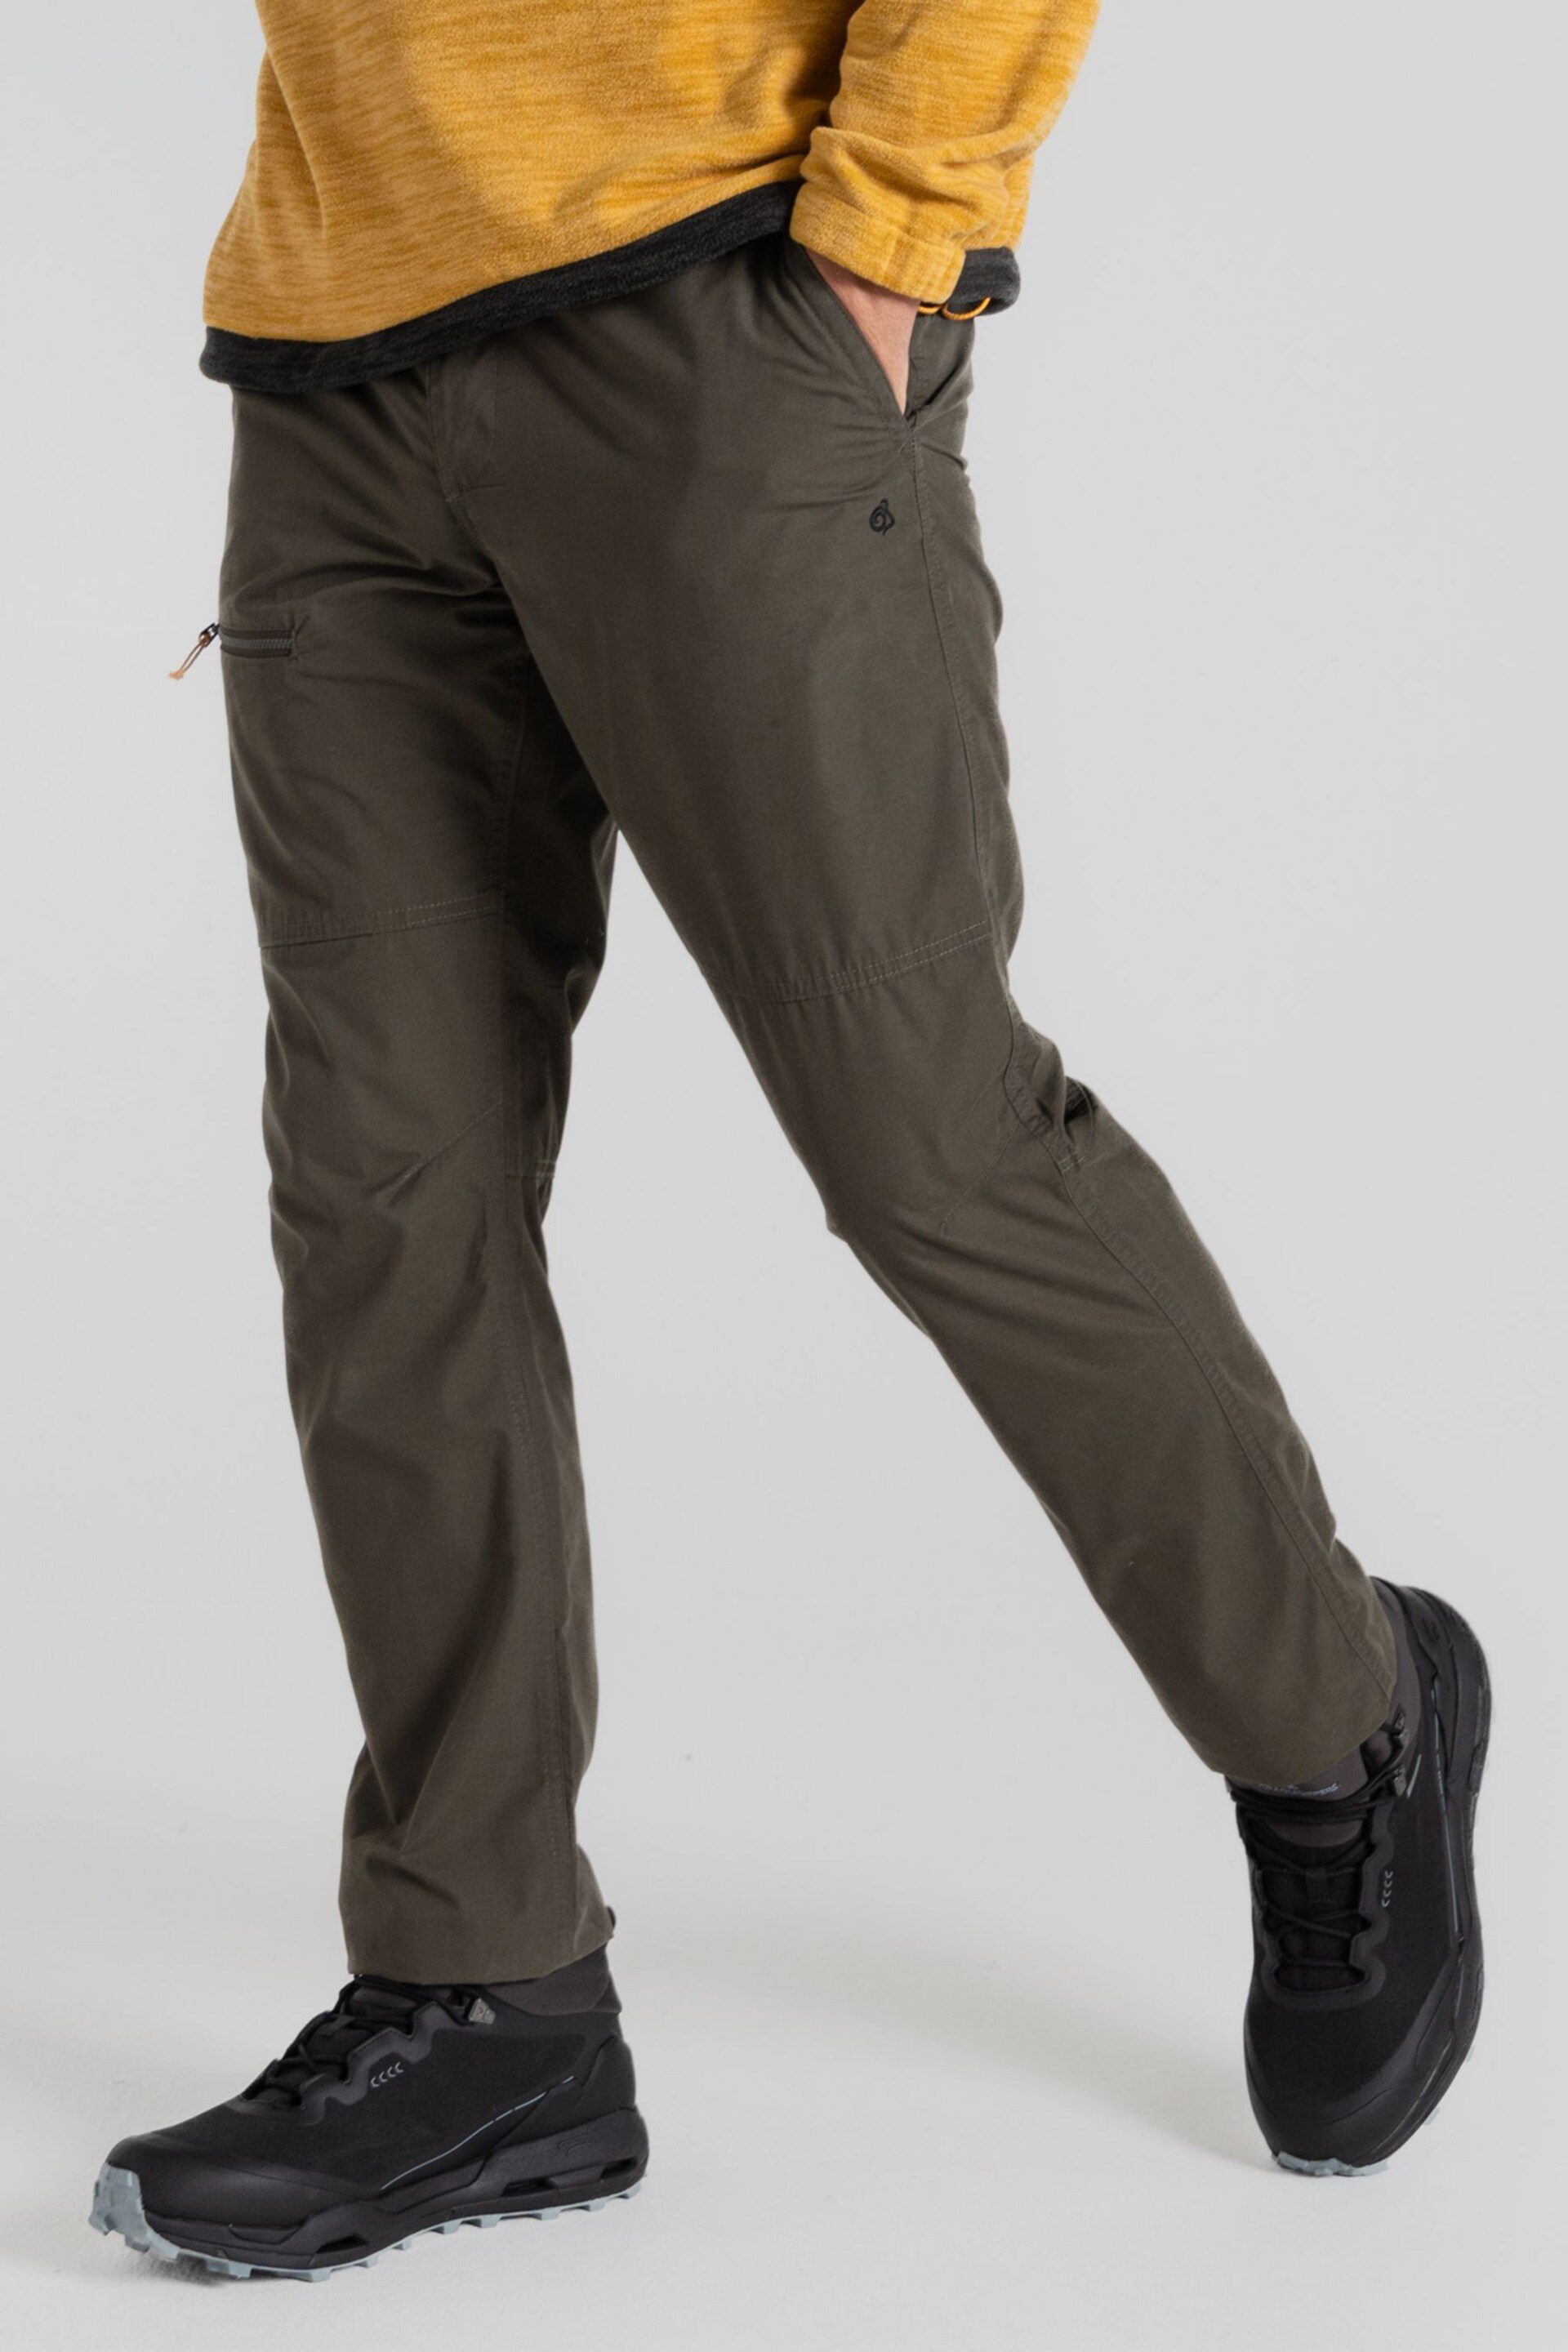 Craghoppers Green Brisk Trousers - Image 1 of 7